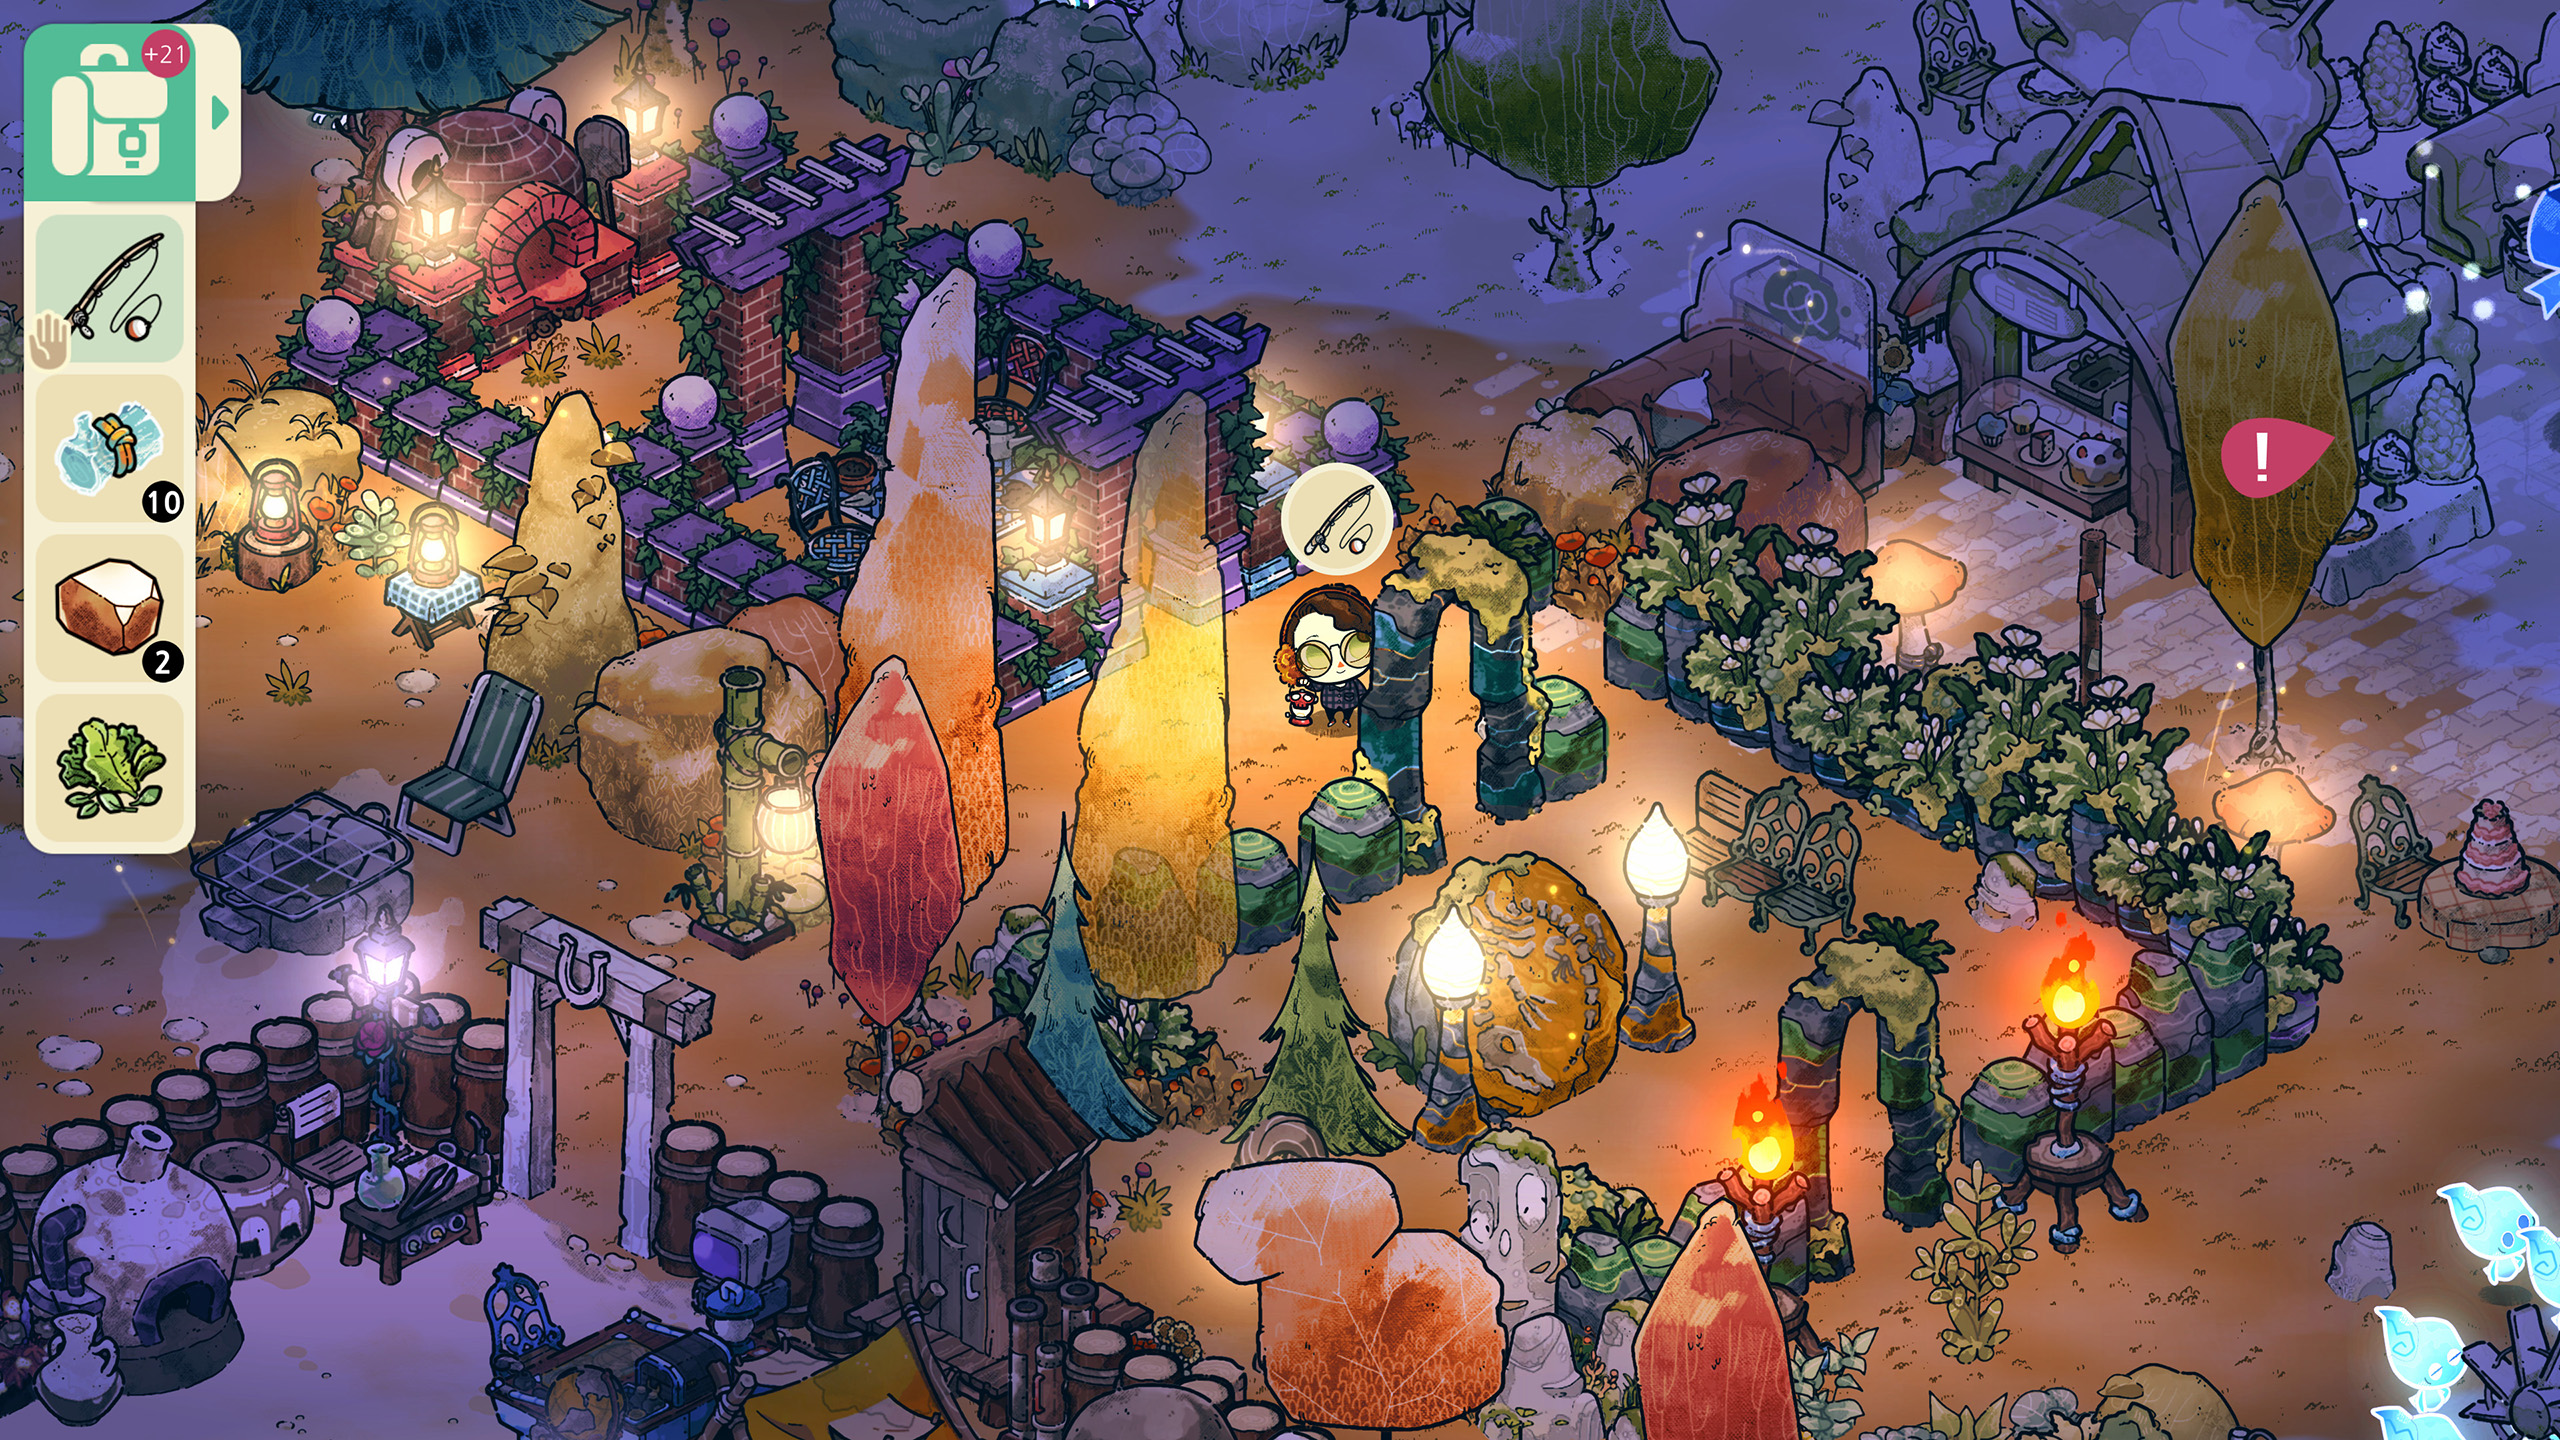 A screenshot from Cozy Grove.